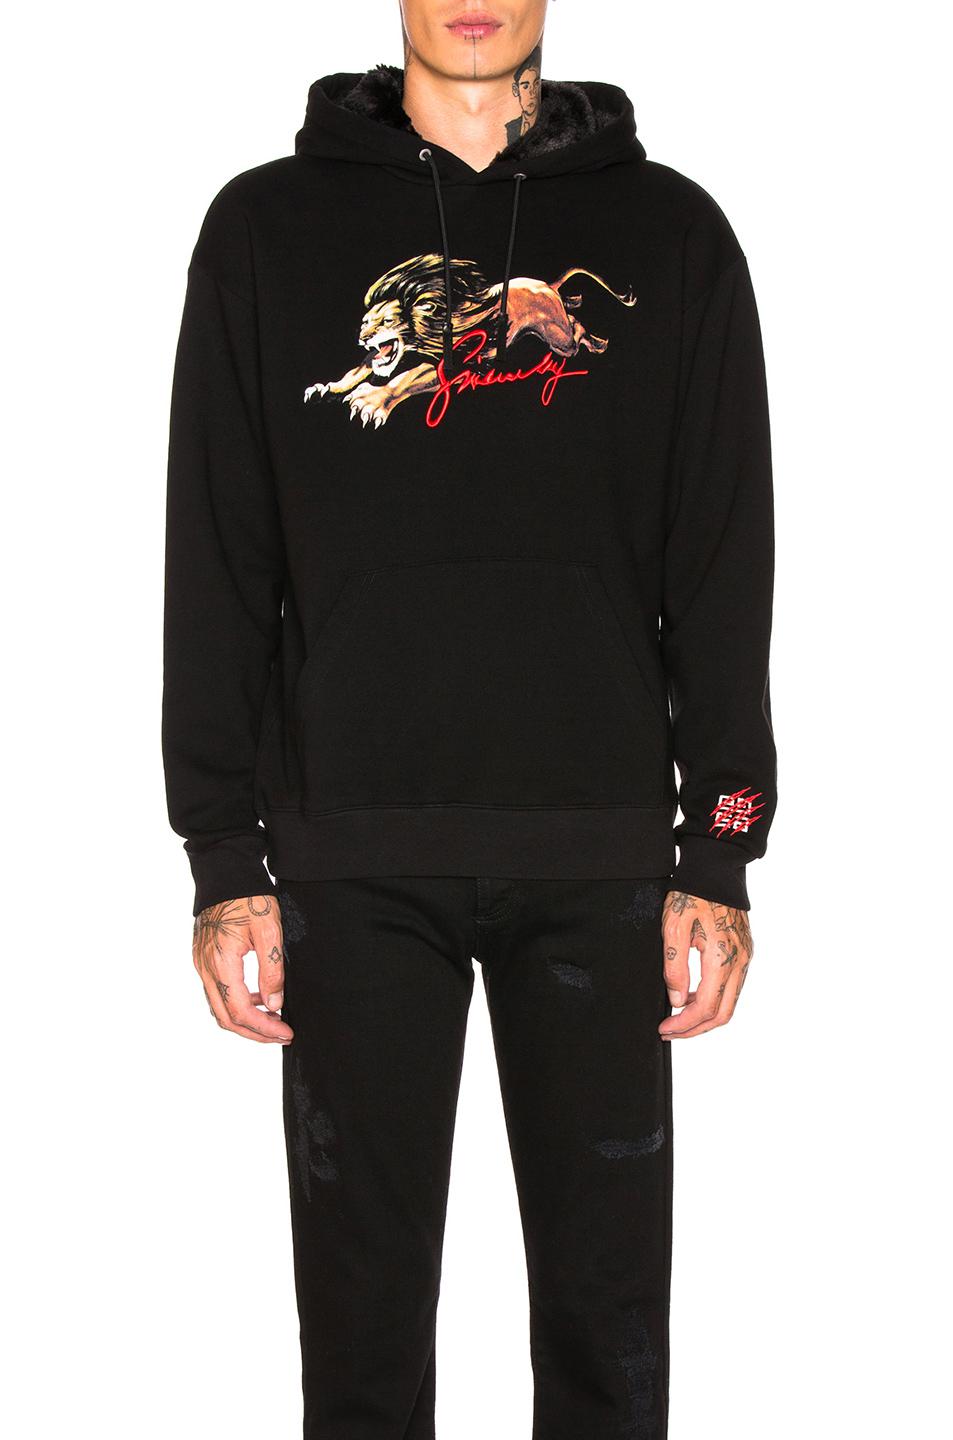 Givenchy Faux Fur Lion Hoodie in Black for Men - Lyst